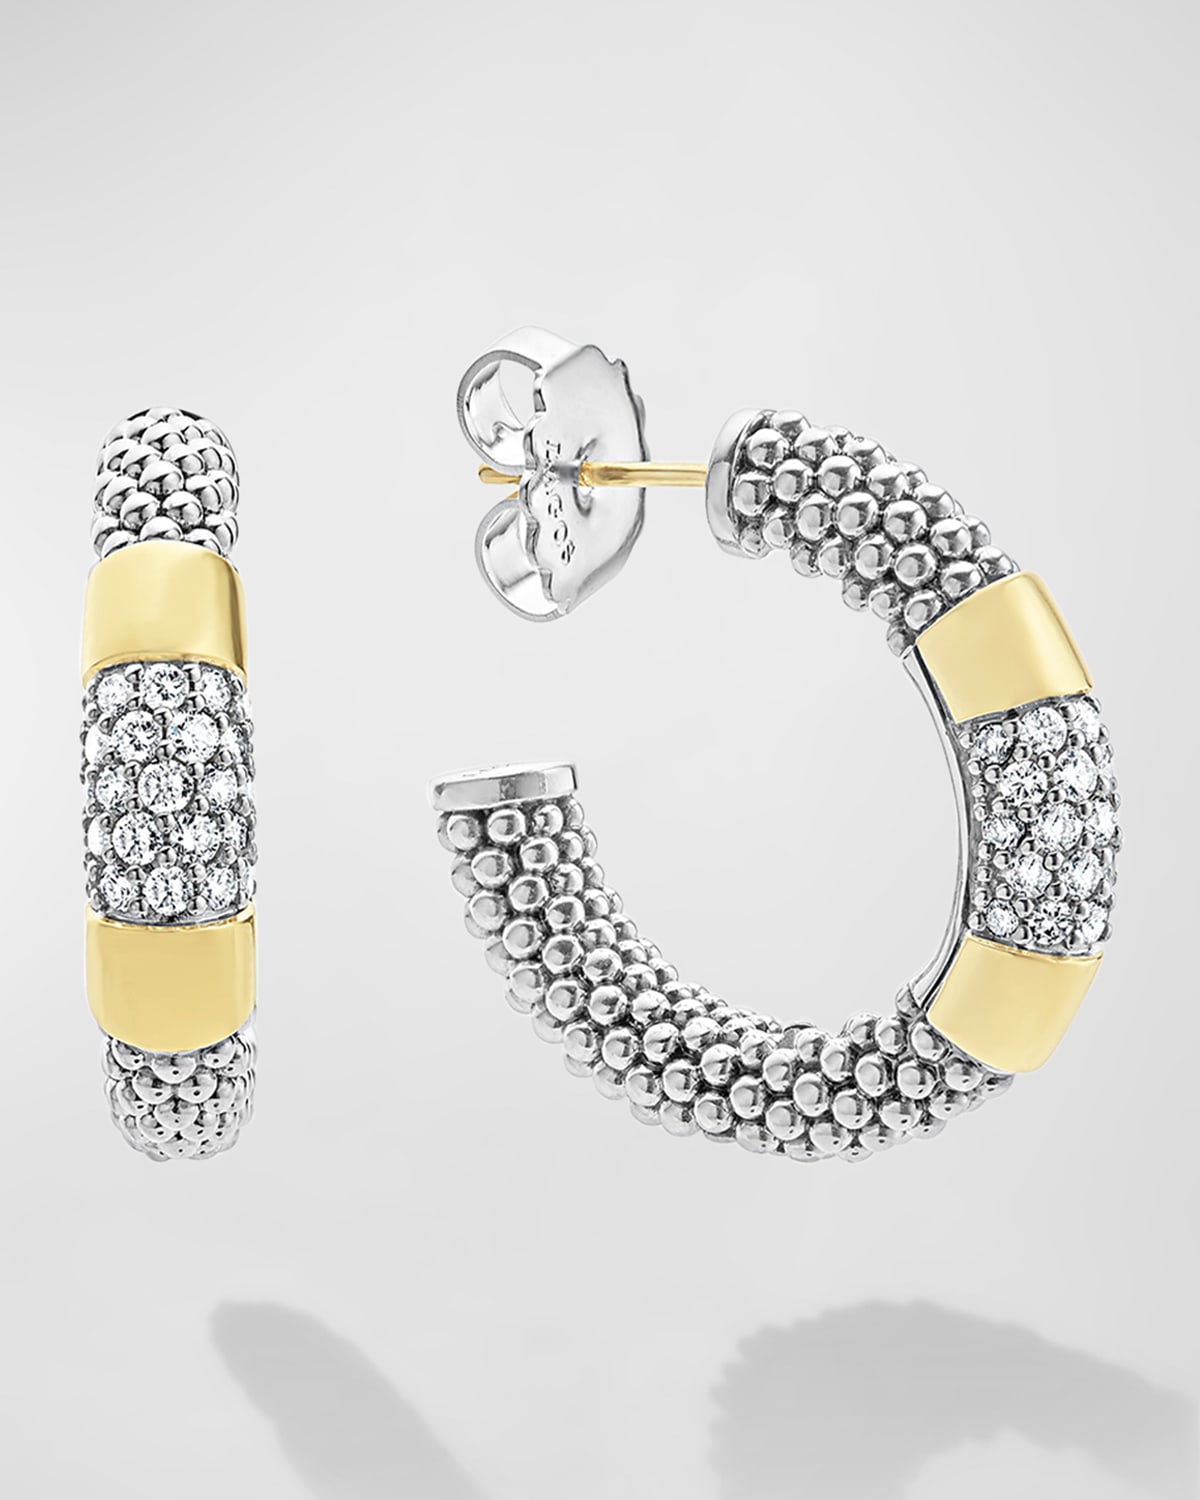 LAGOS DIAMOND HOOP EARRINGS WITH SMOOTH 18K GOLD AND CLASSIC STERLING SILVER CAVIAR BEADING